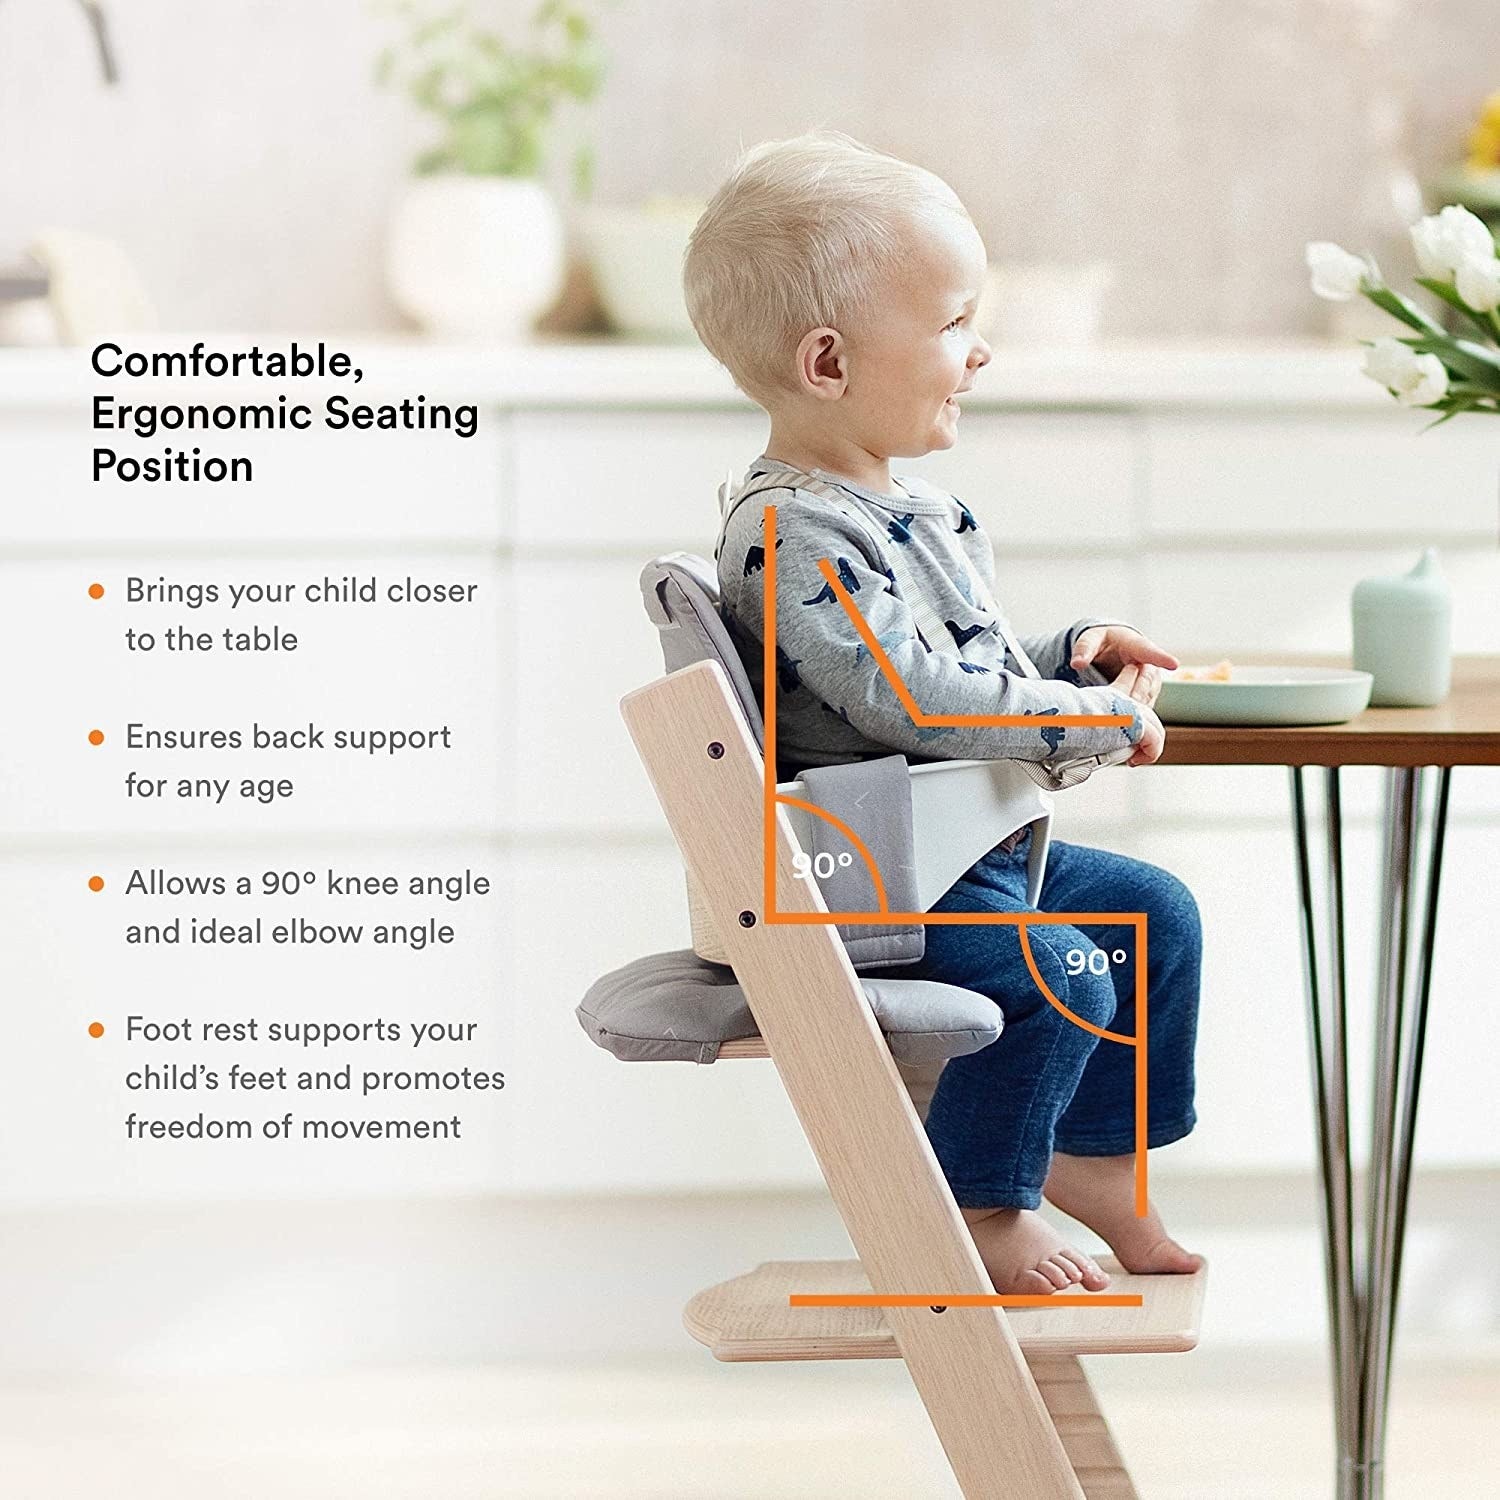 If already have a high chair, but the footrest isn't there, check